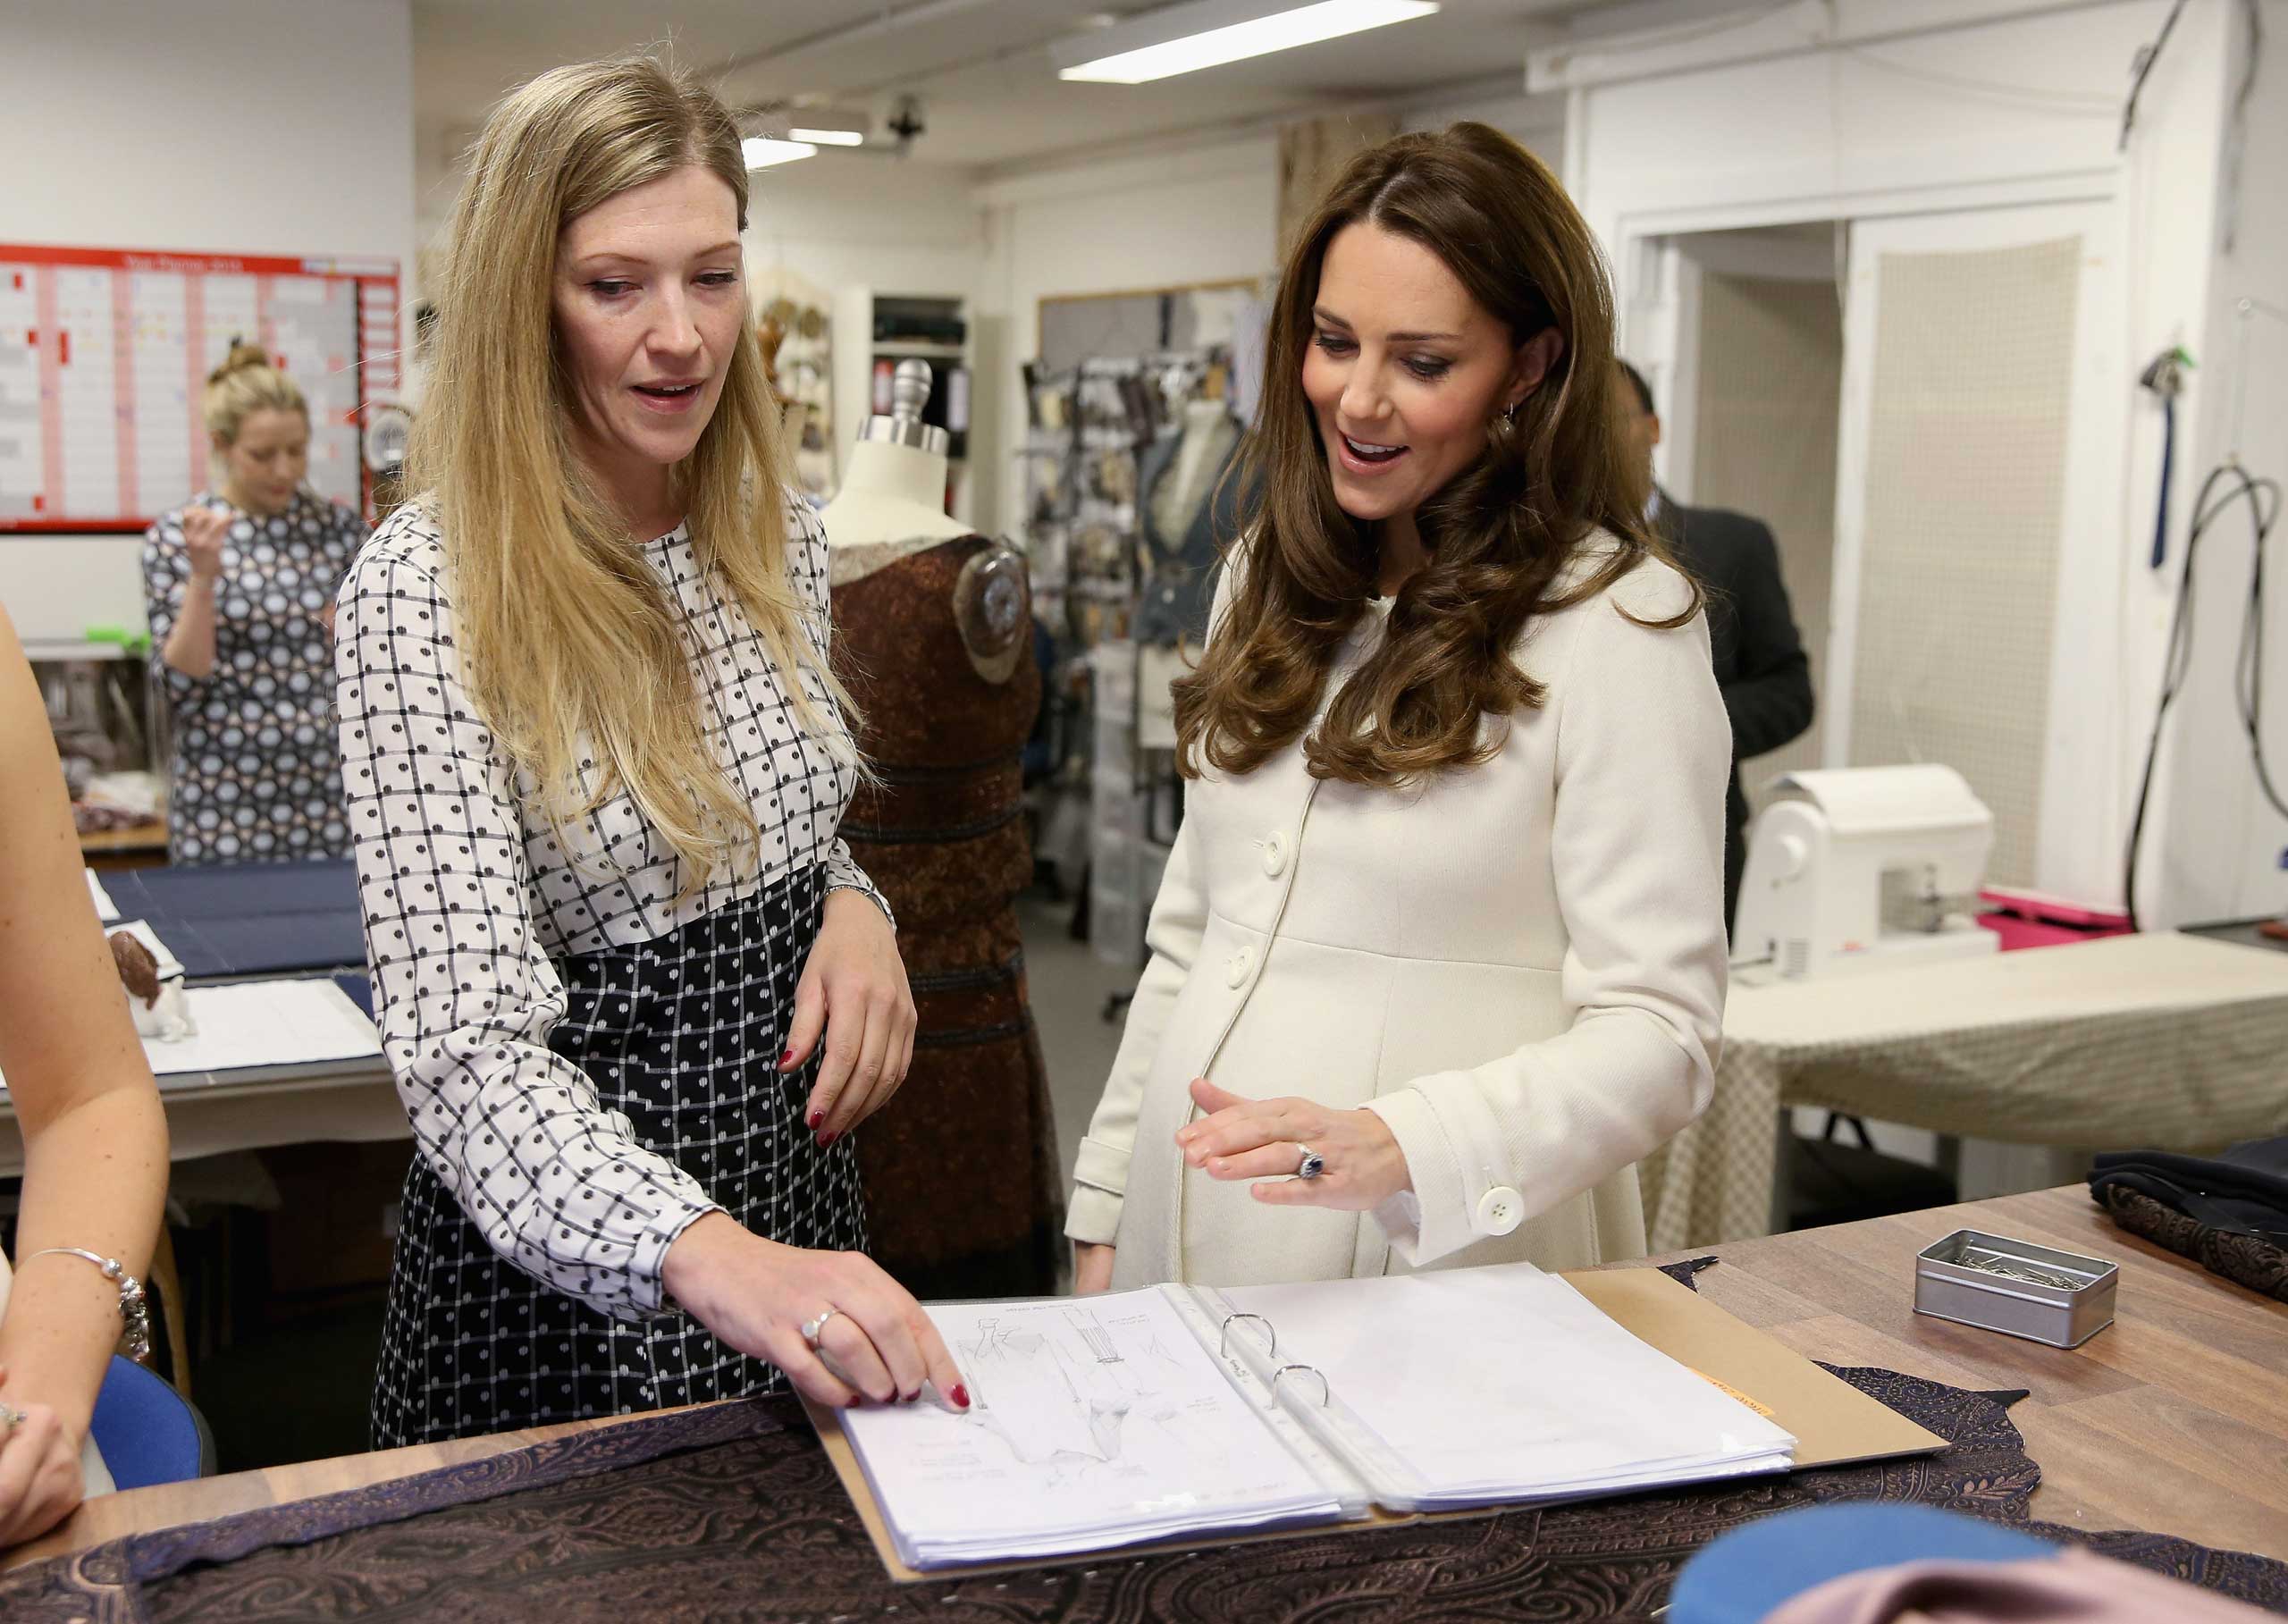 Catherine, Duchess of Cambridge is shown consumes during an official visit to the set of Downton Abbey at Ealing Studios on March 12, 2015 in London, England. (Chris Jackson—Getty Images)